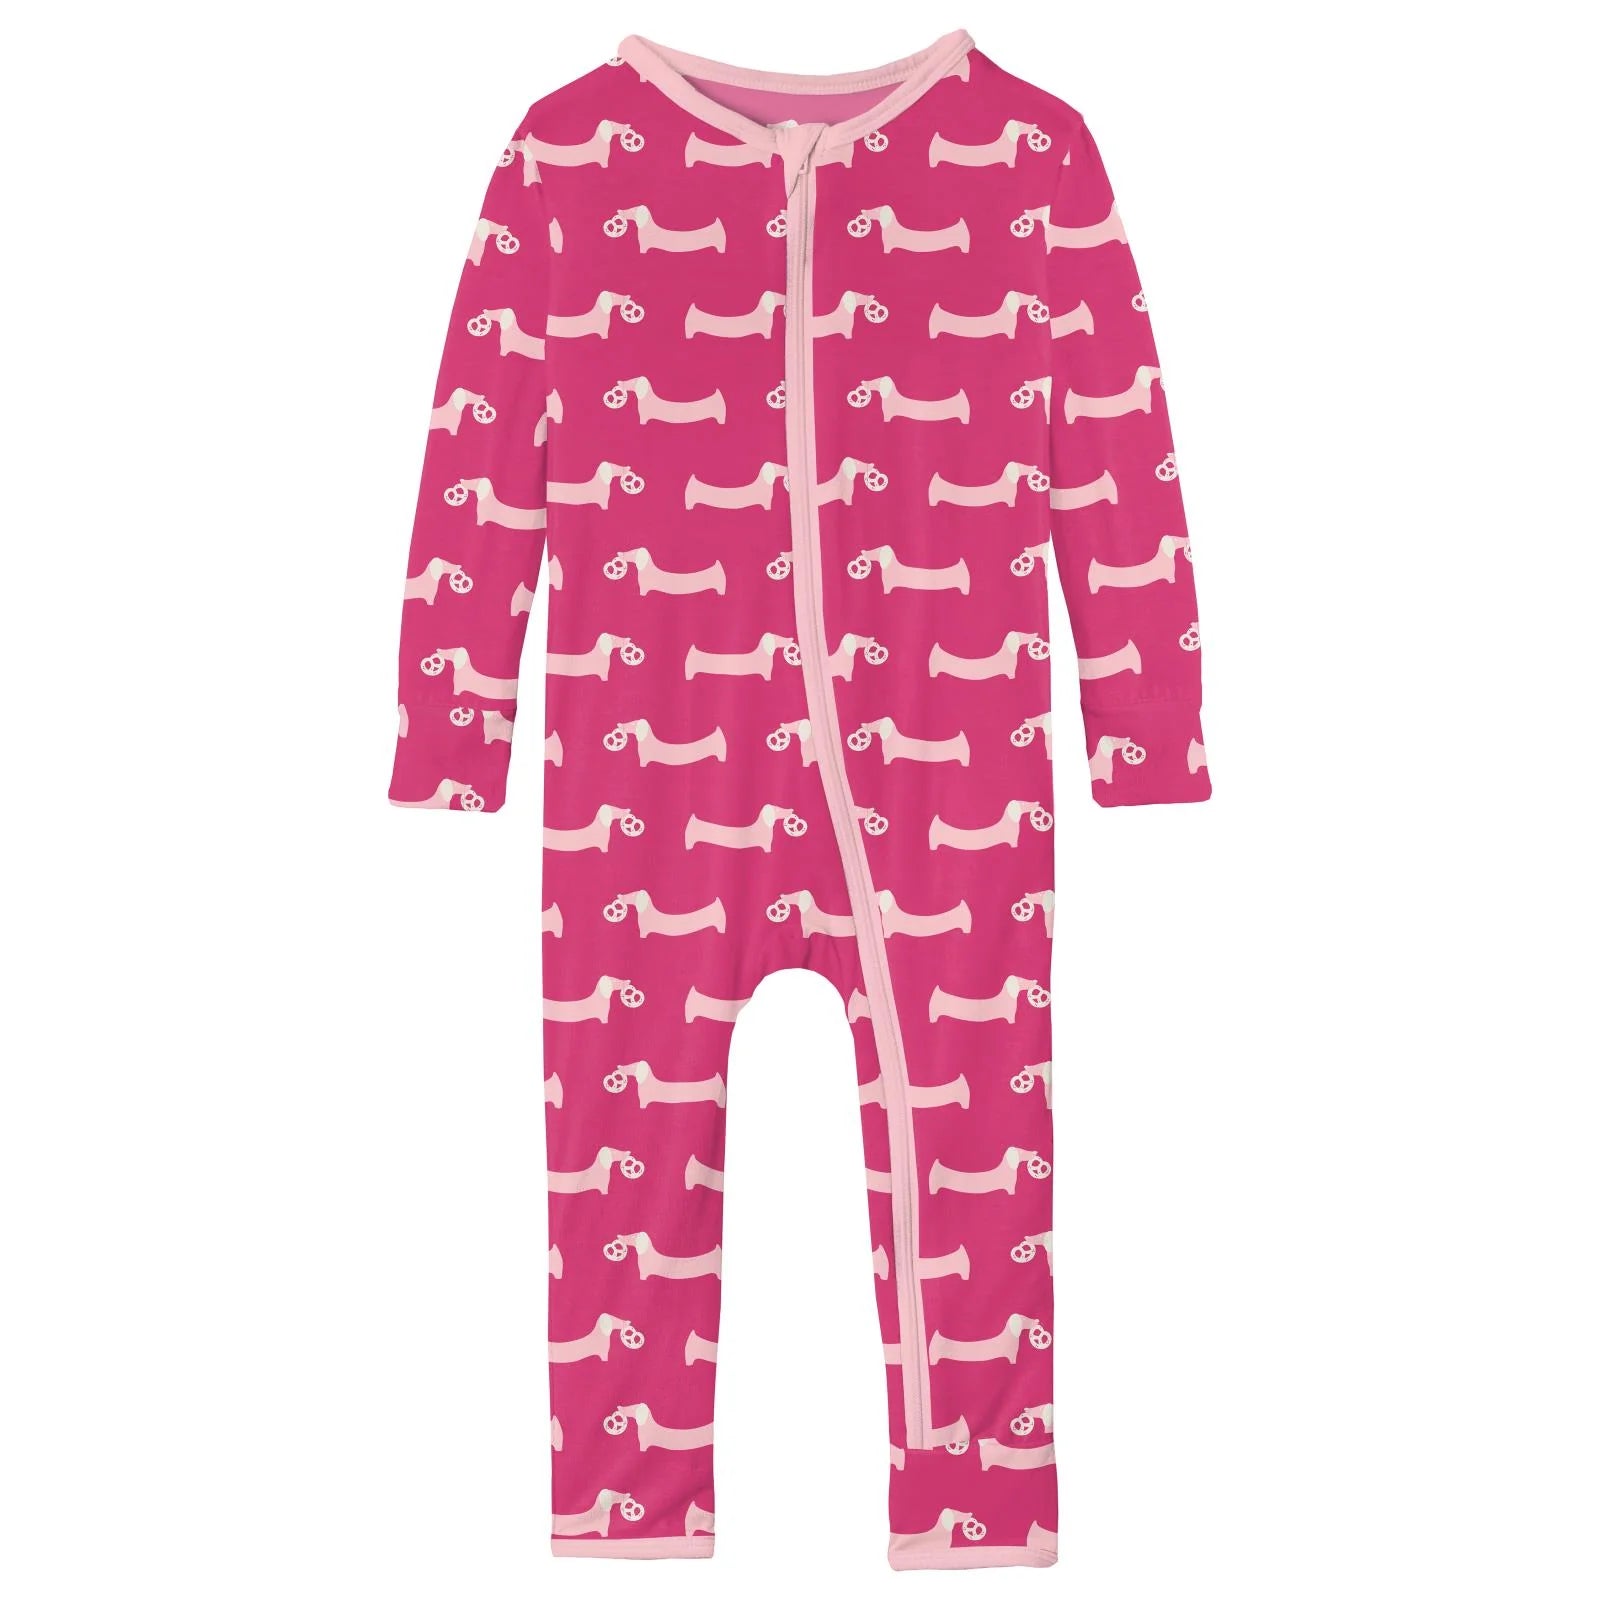 KicKee Pants Print Coverall with Zipper (Cotton Candy Stripe)